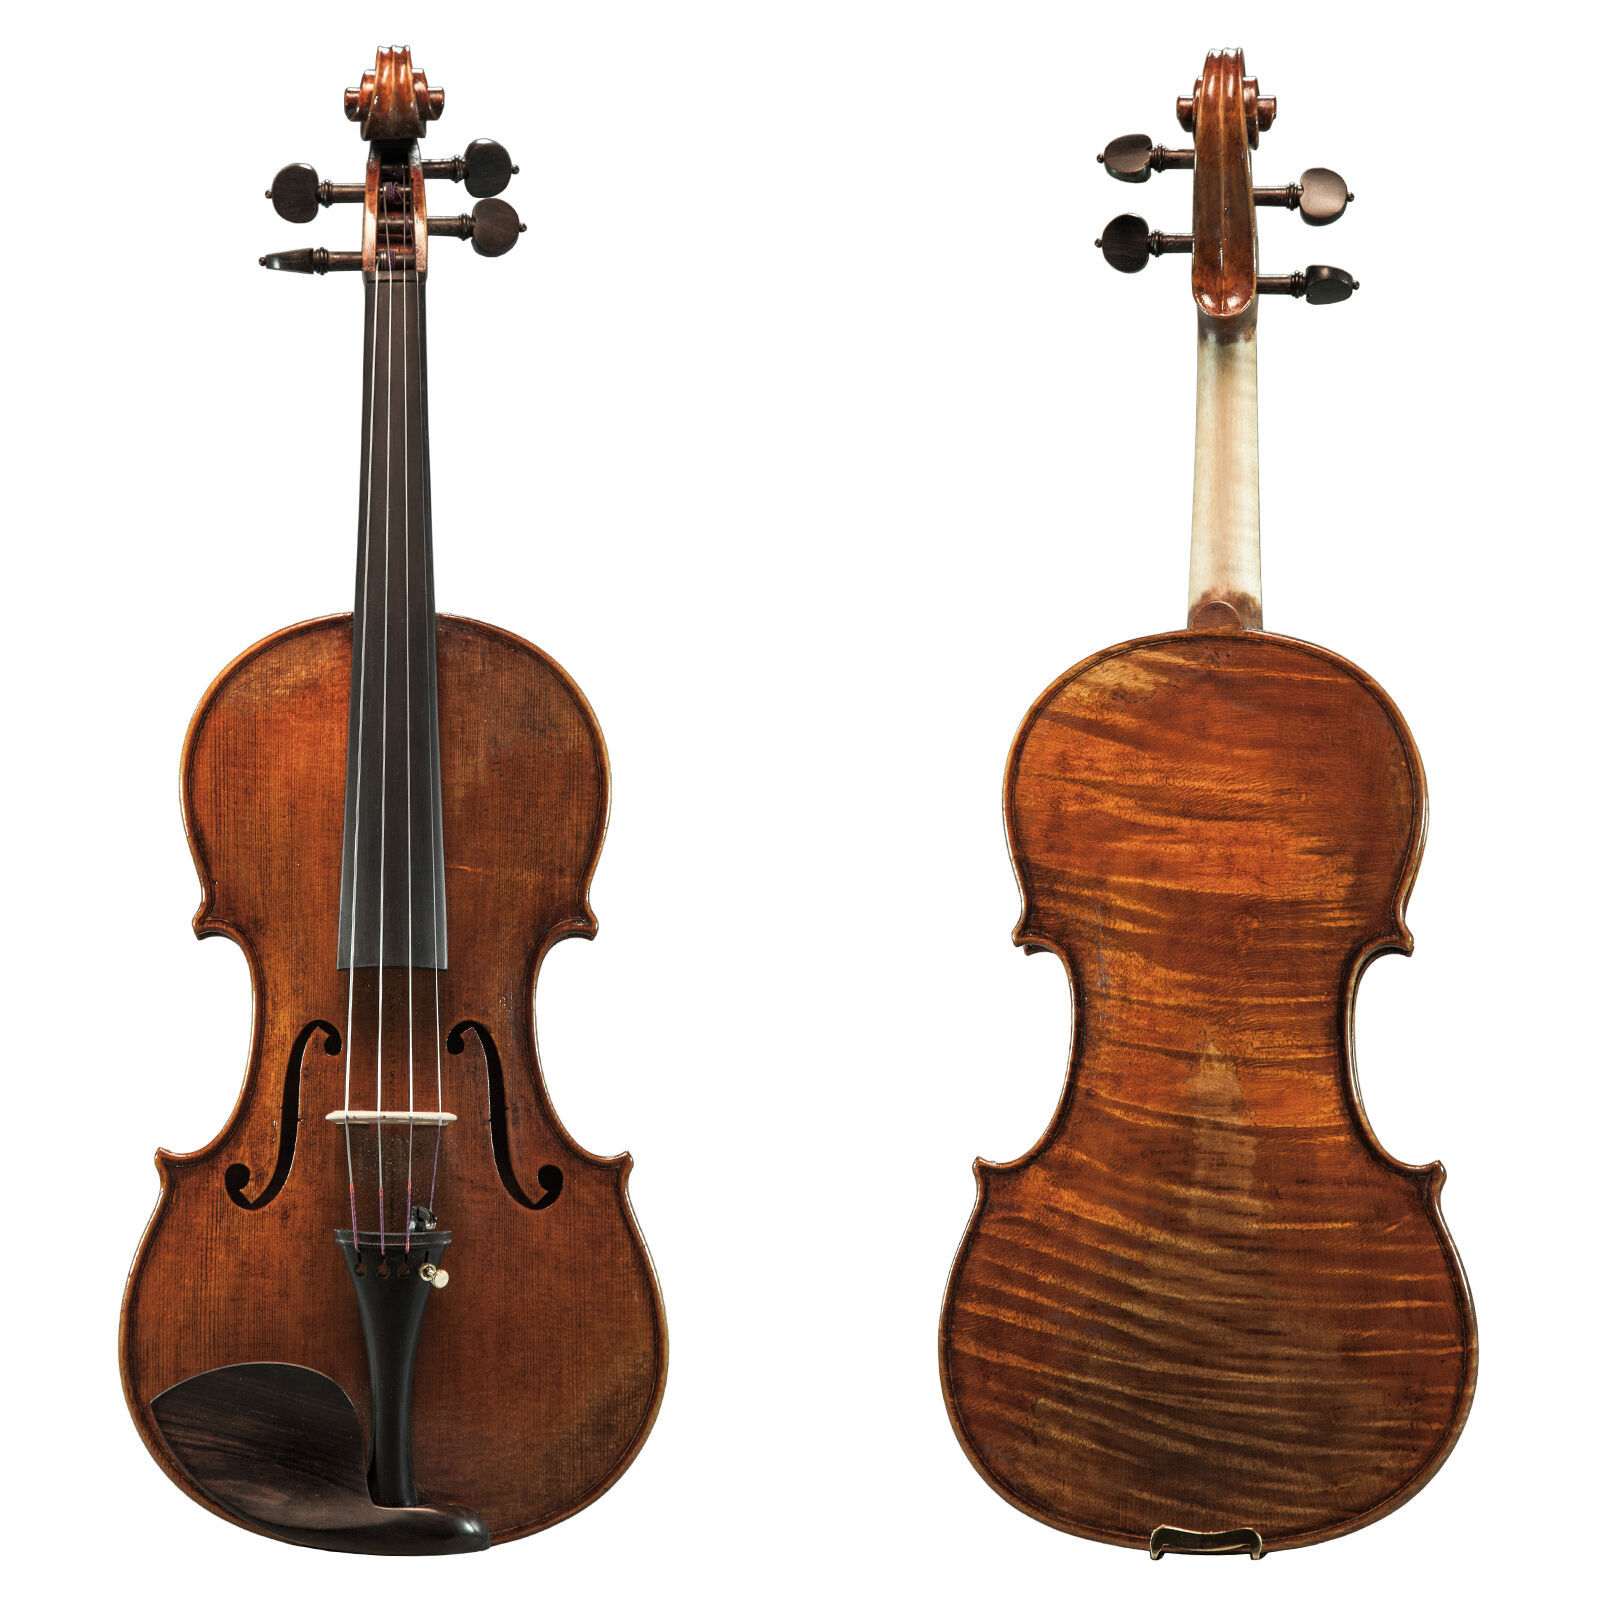 Primary image for SKY Vintage 4/4 Full Size Violin Professional Hand-made Violin Antique Look